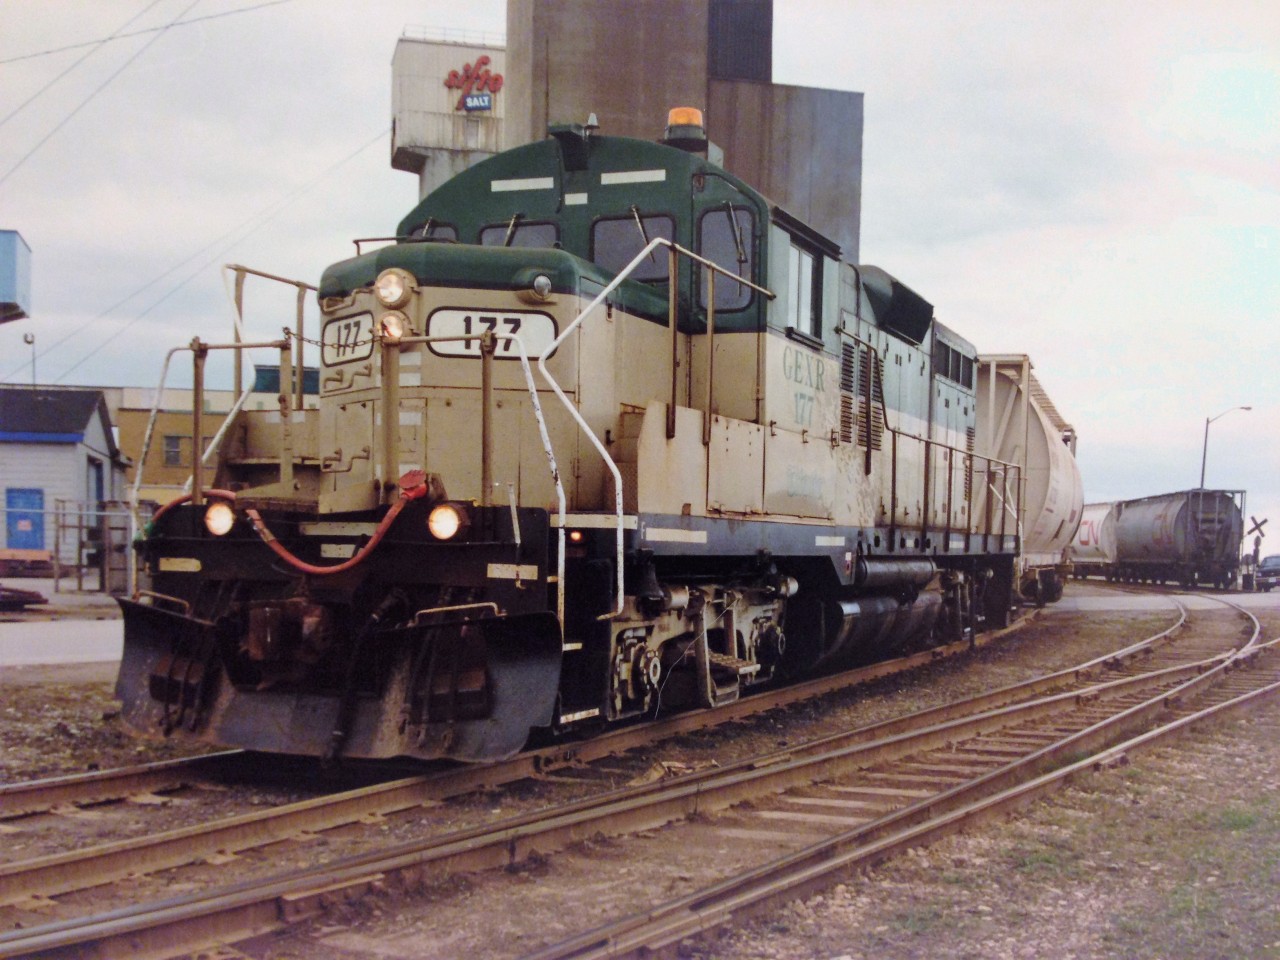 Goderich-Exeter Railway (GEXR) GP9 177, departs the large Sifto Salt mine in Goderich, Ontario with three hoppers and heads up the steep grade towards the yard on April 28, 1995. The former Cartier Railway unit would operate on GEXR until 2002, after a damaged main generator sidelined it for good.